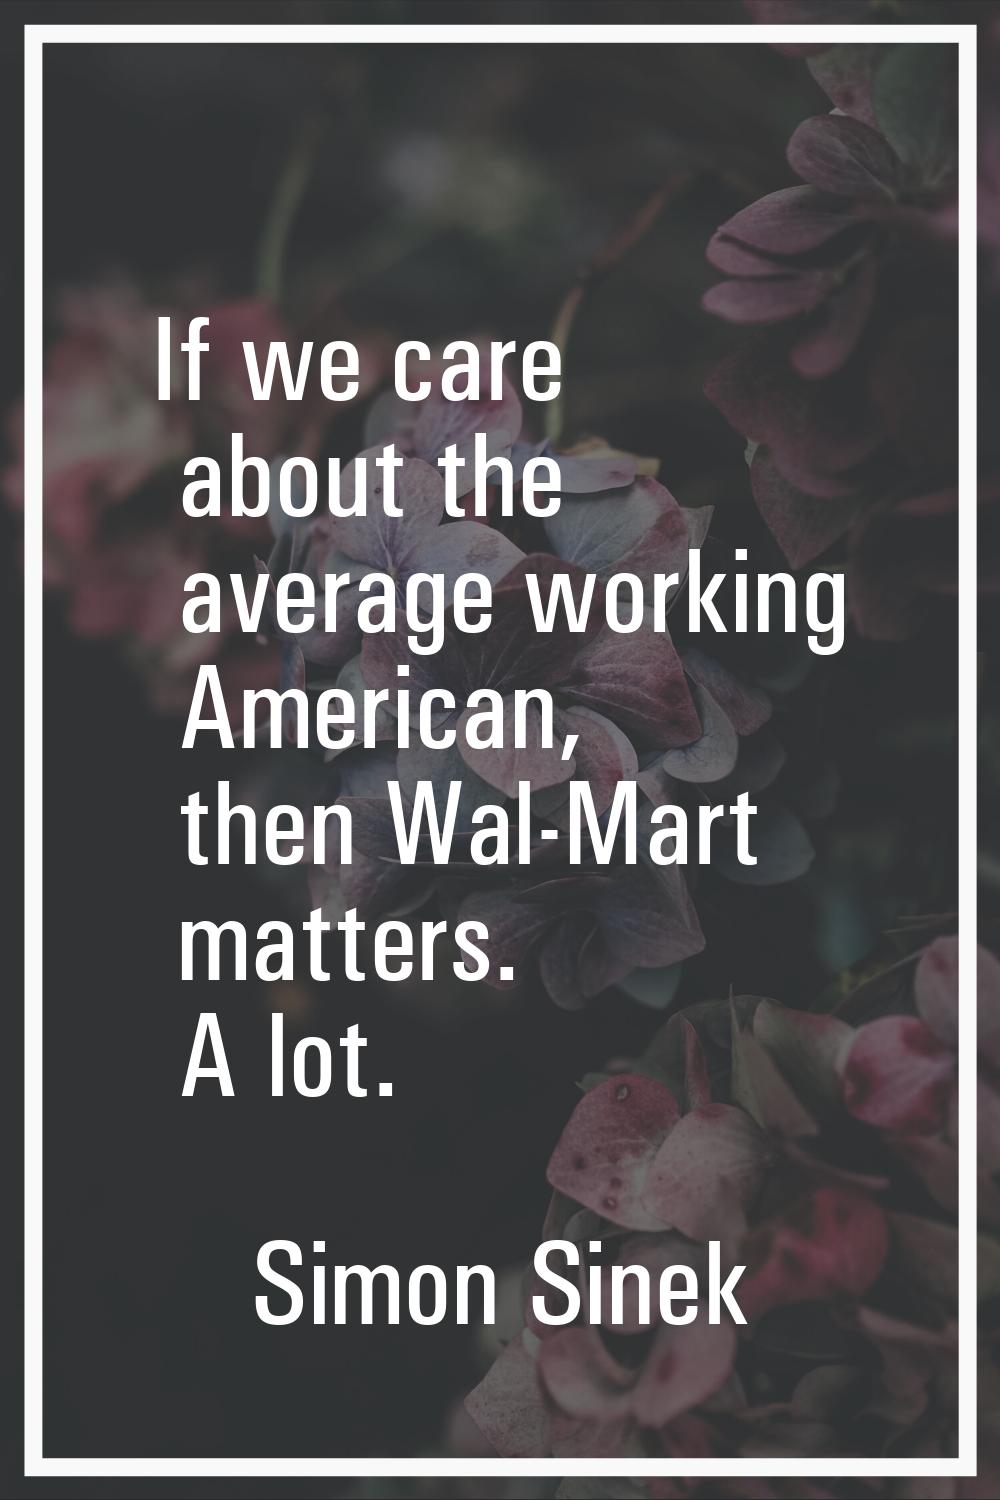 If we care about the average working American, then Wal-Mart matters. A lot.